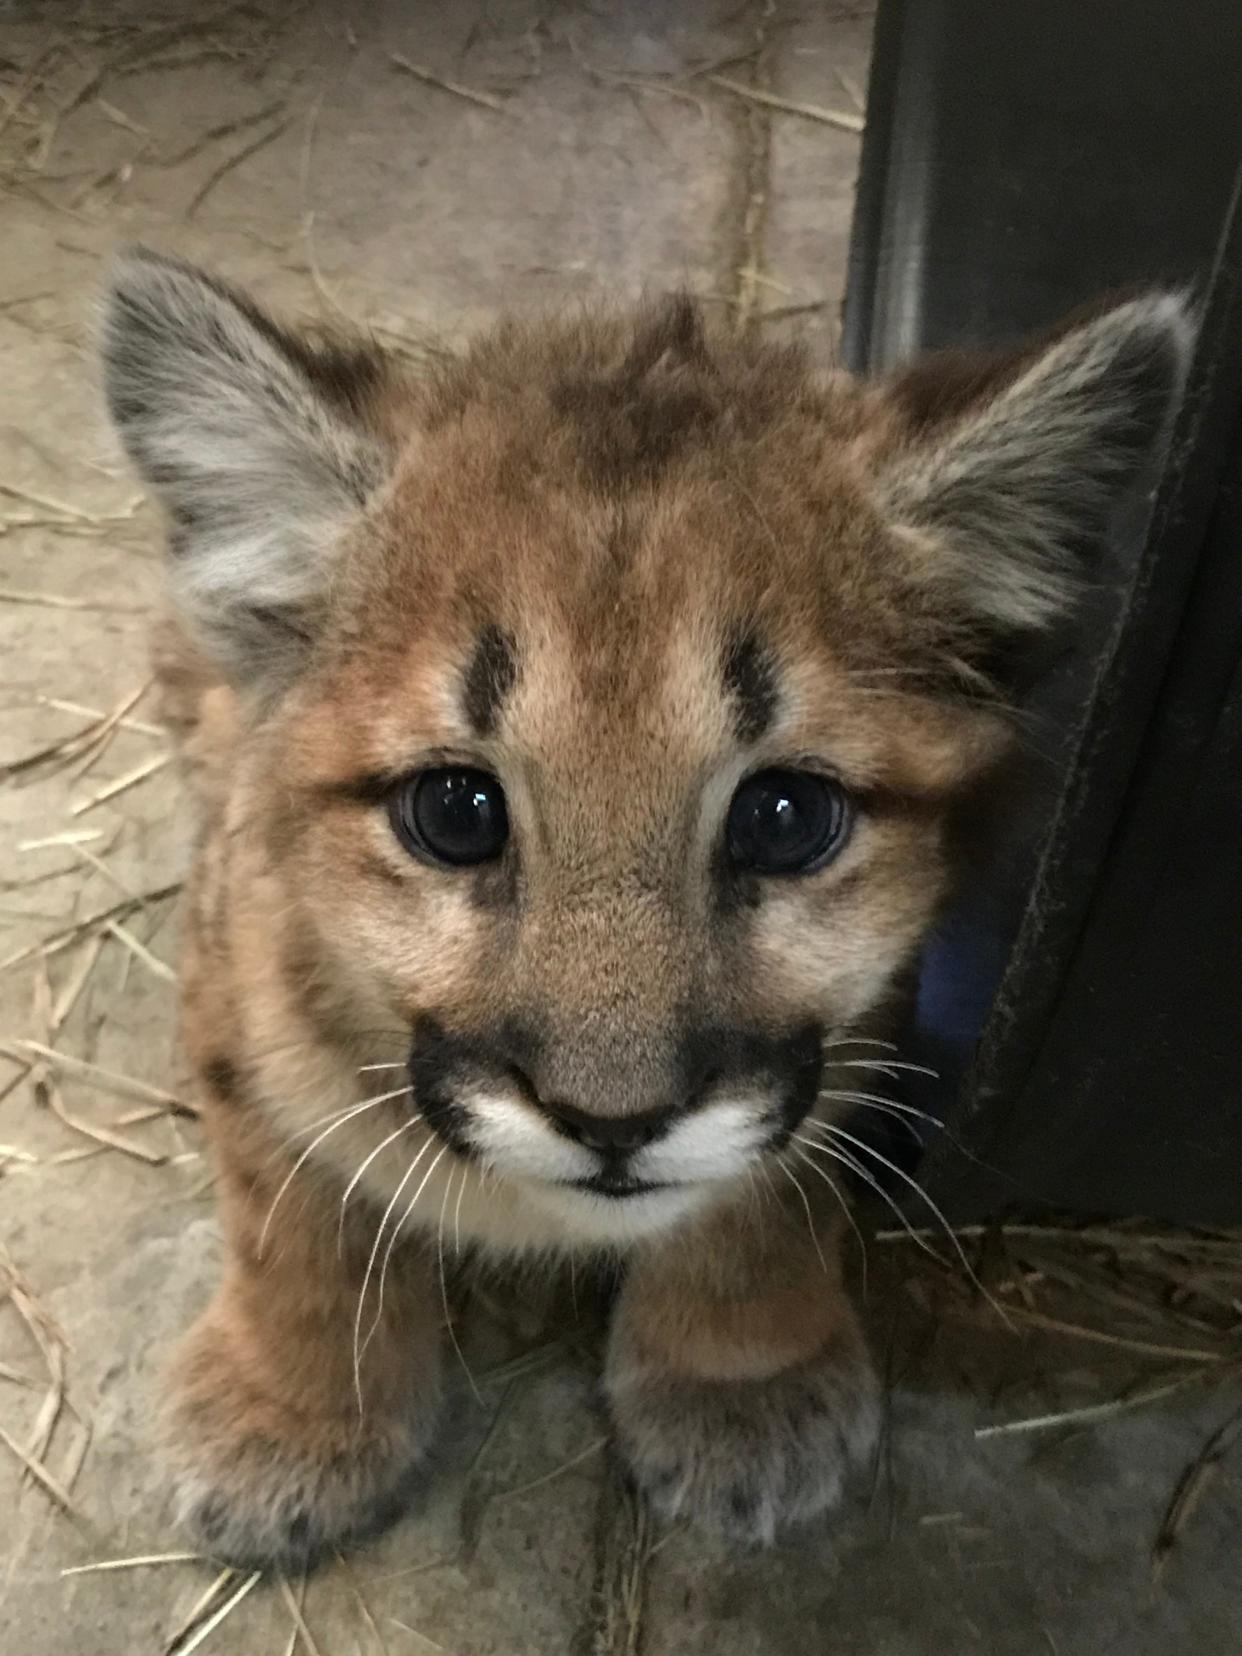 A mountain lion cub orphaned at 6 weeks old arrived at Cheyenne Mountain Zoo on May 28, 2019.